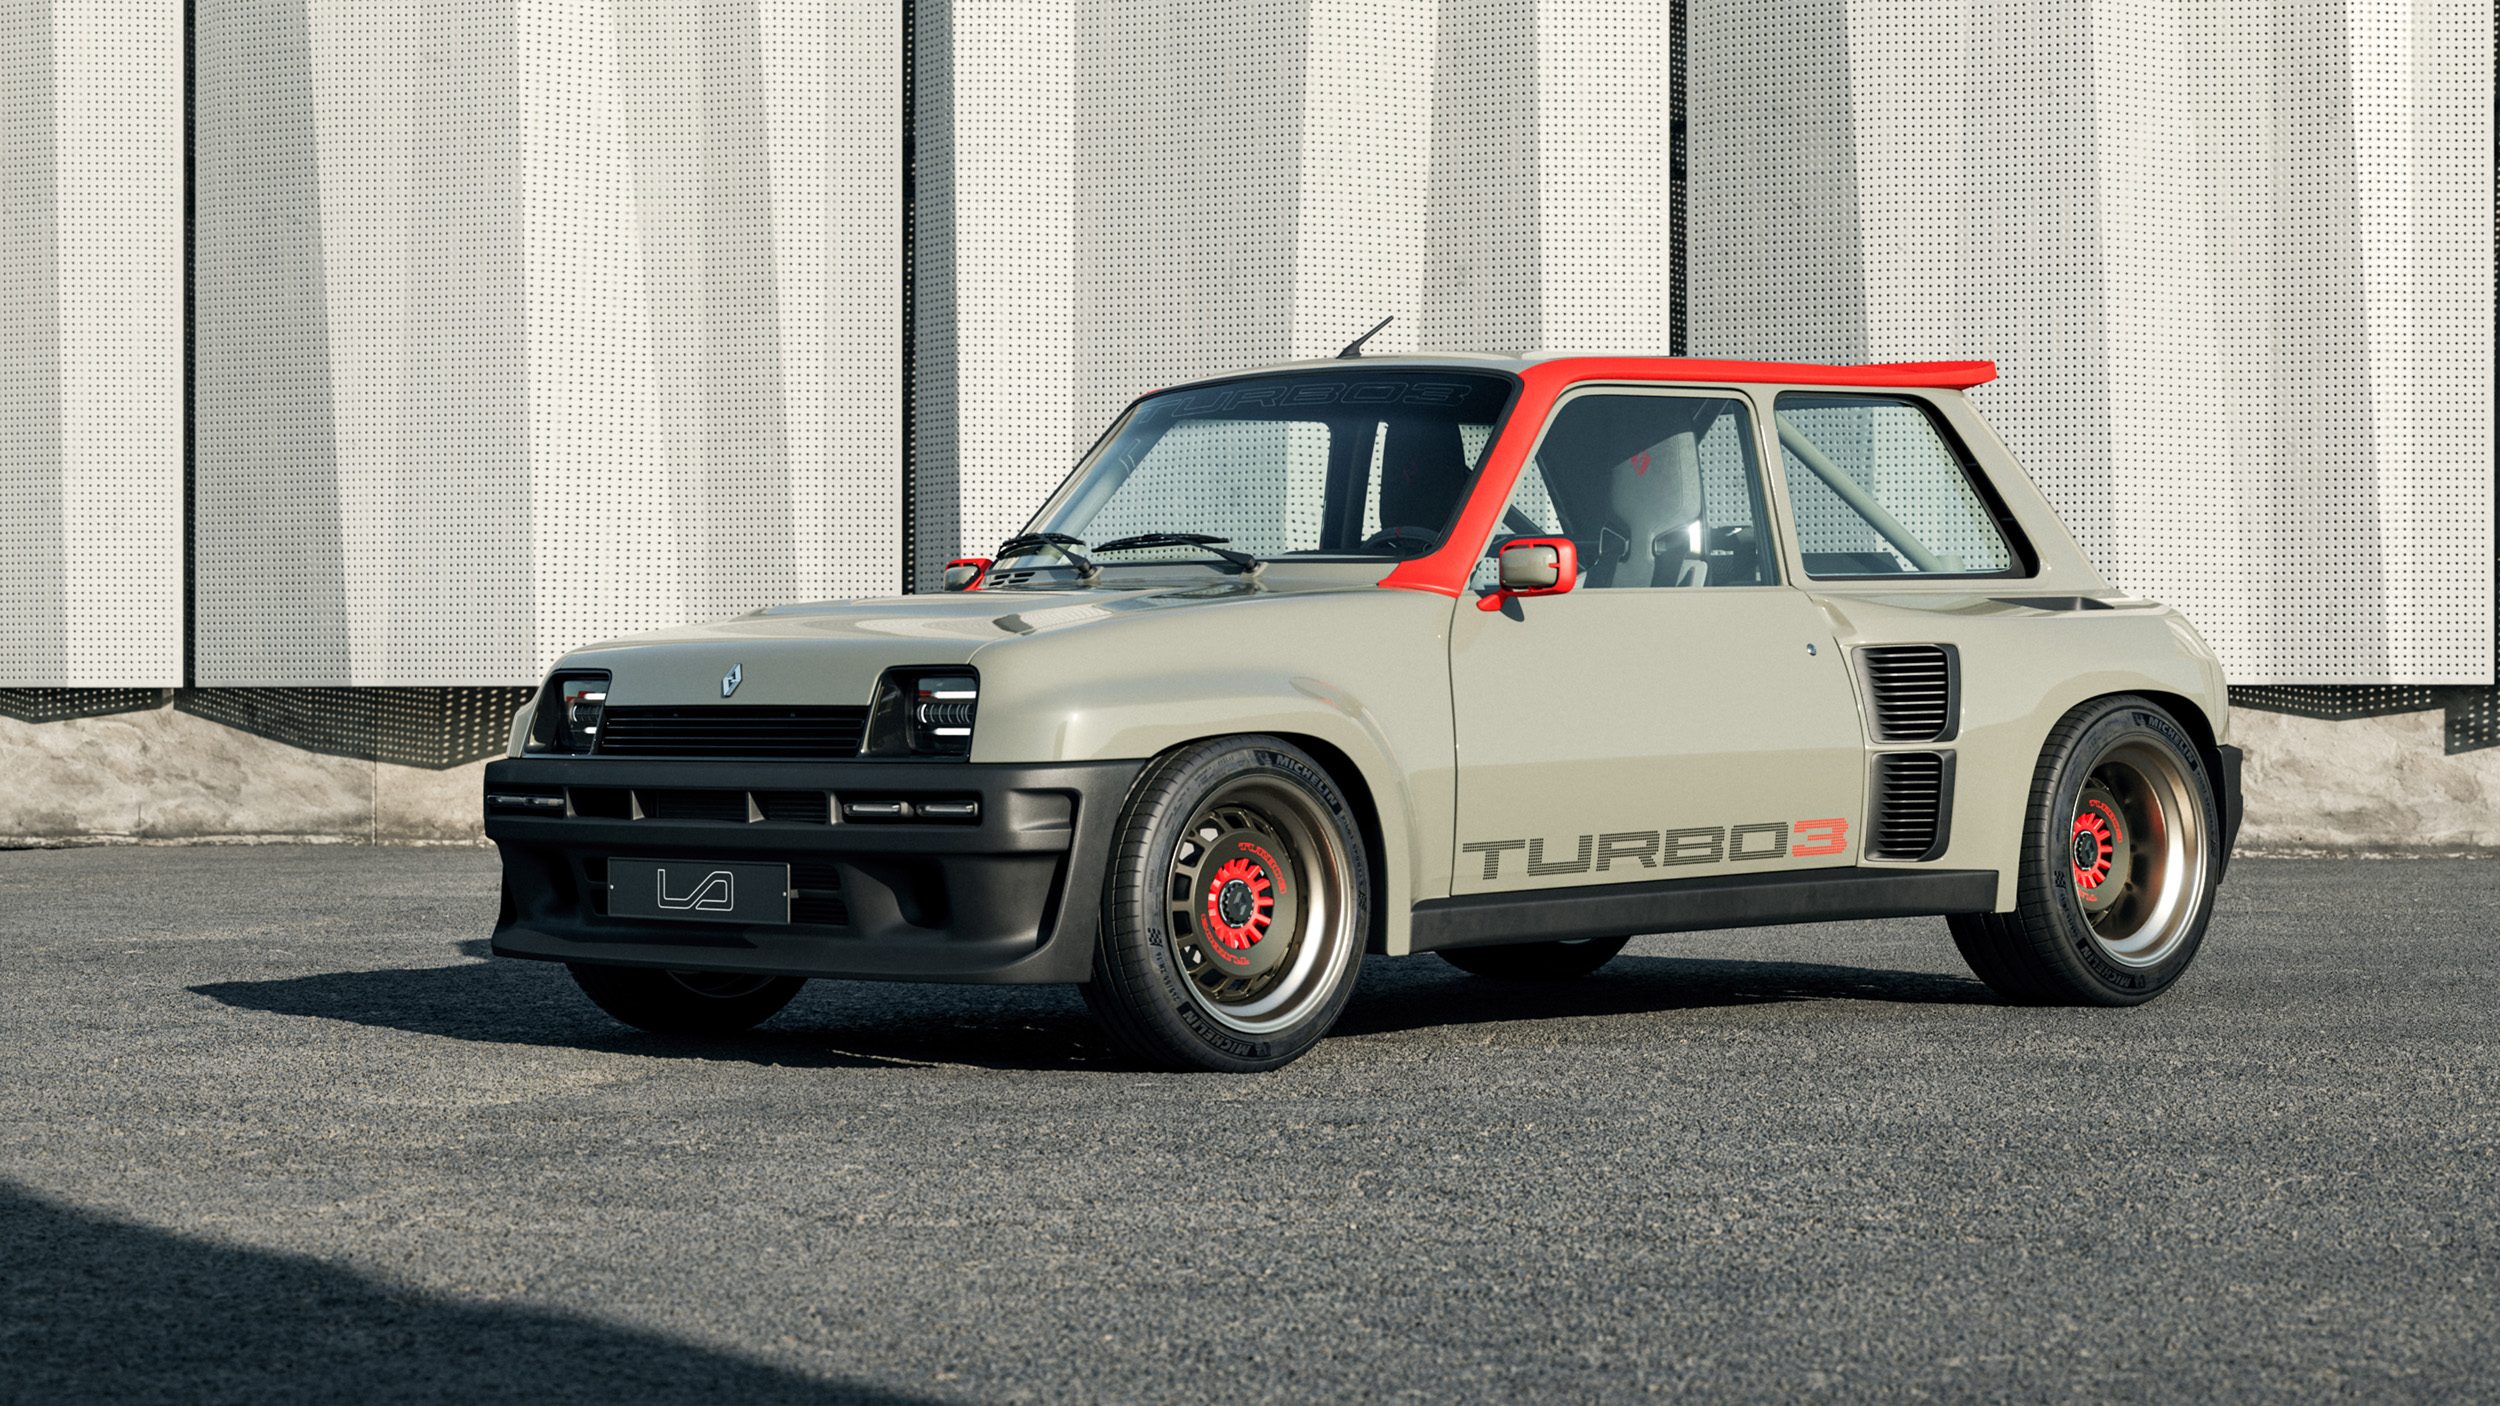 Renault 5 Turbo reborn with 400bhp and carbonfibre body | Autocar